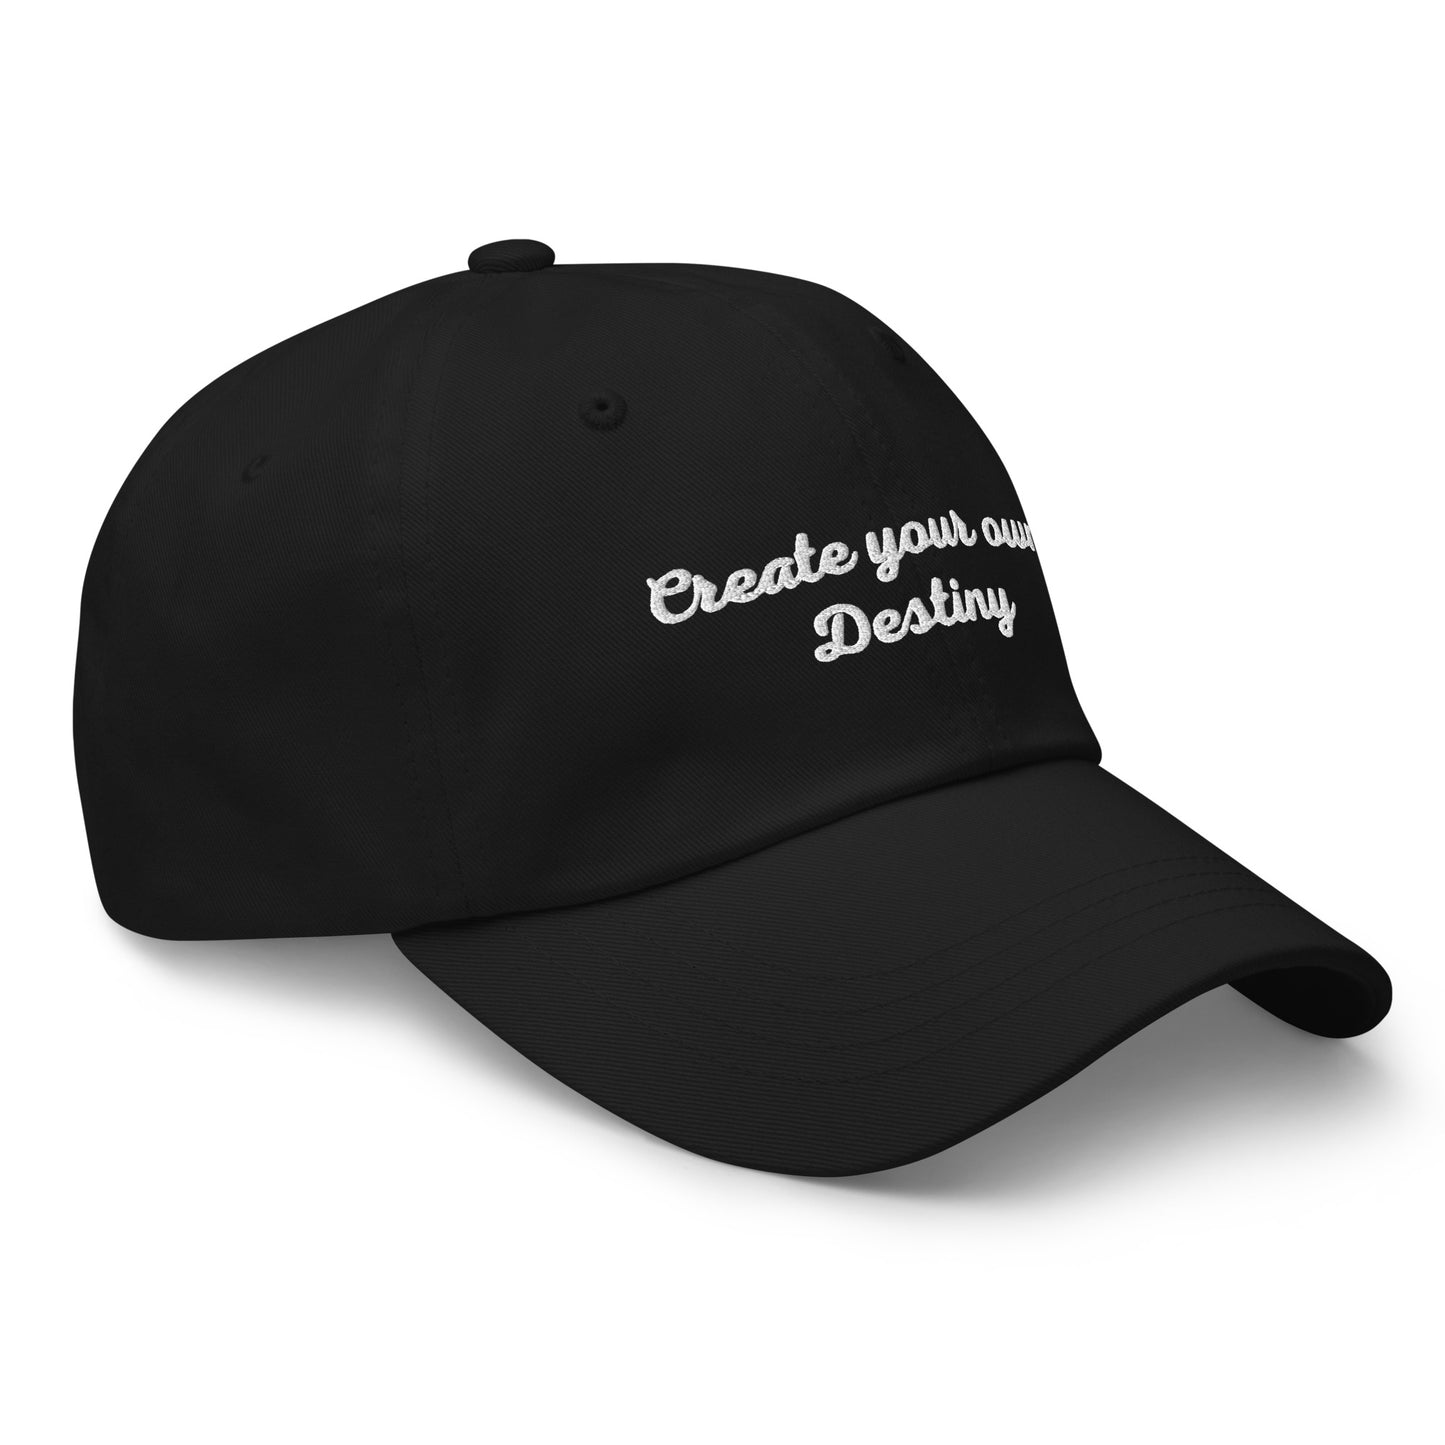 Create your own destiny hat